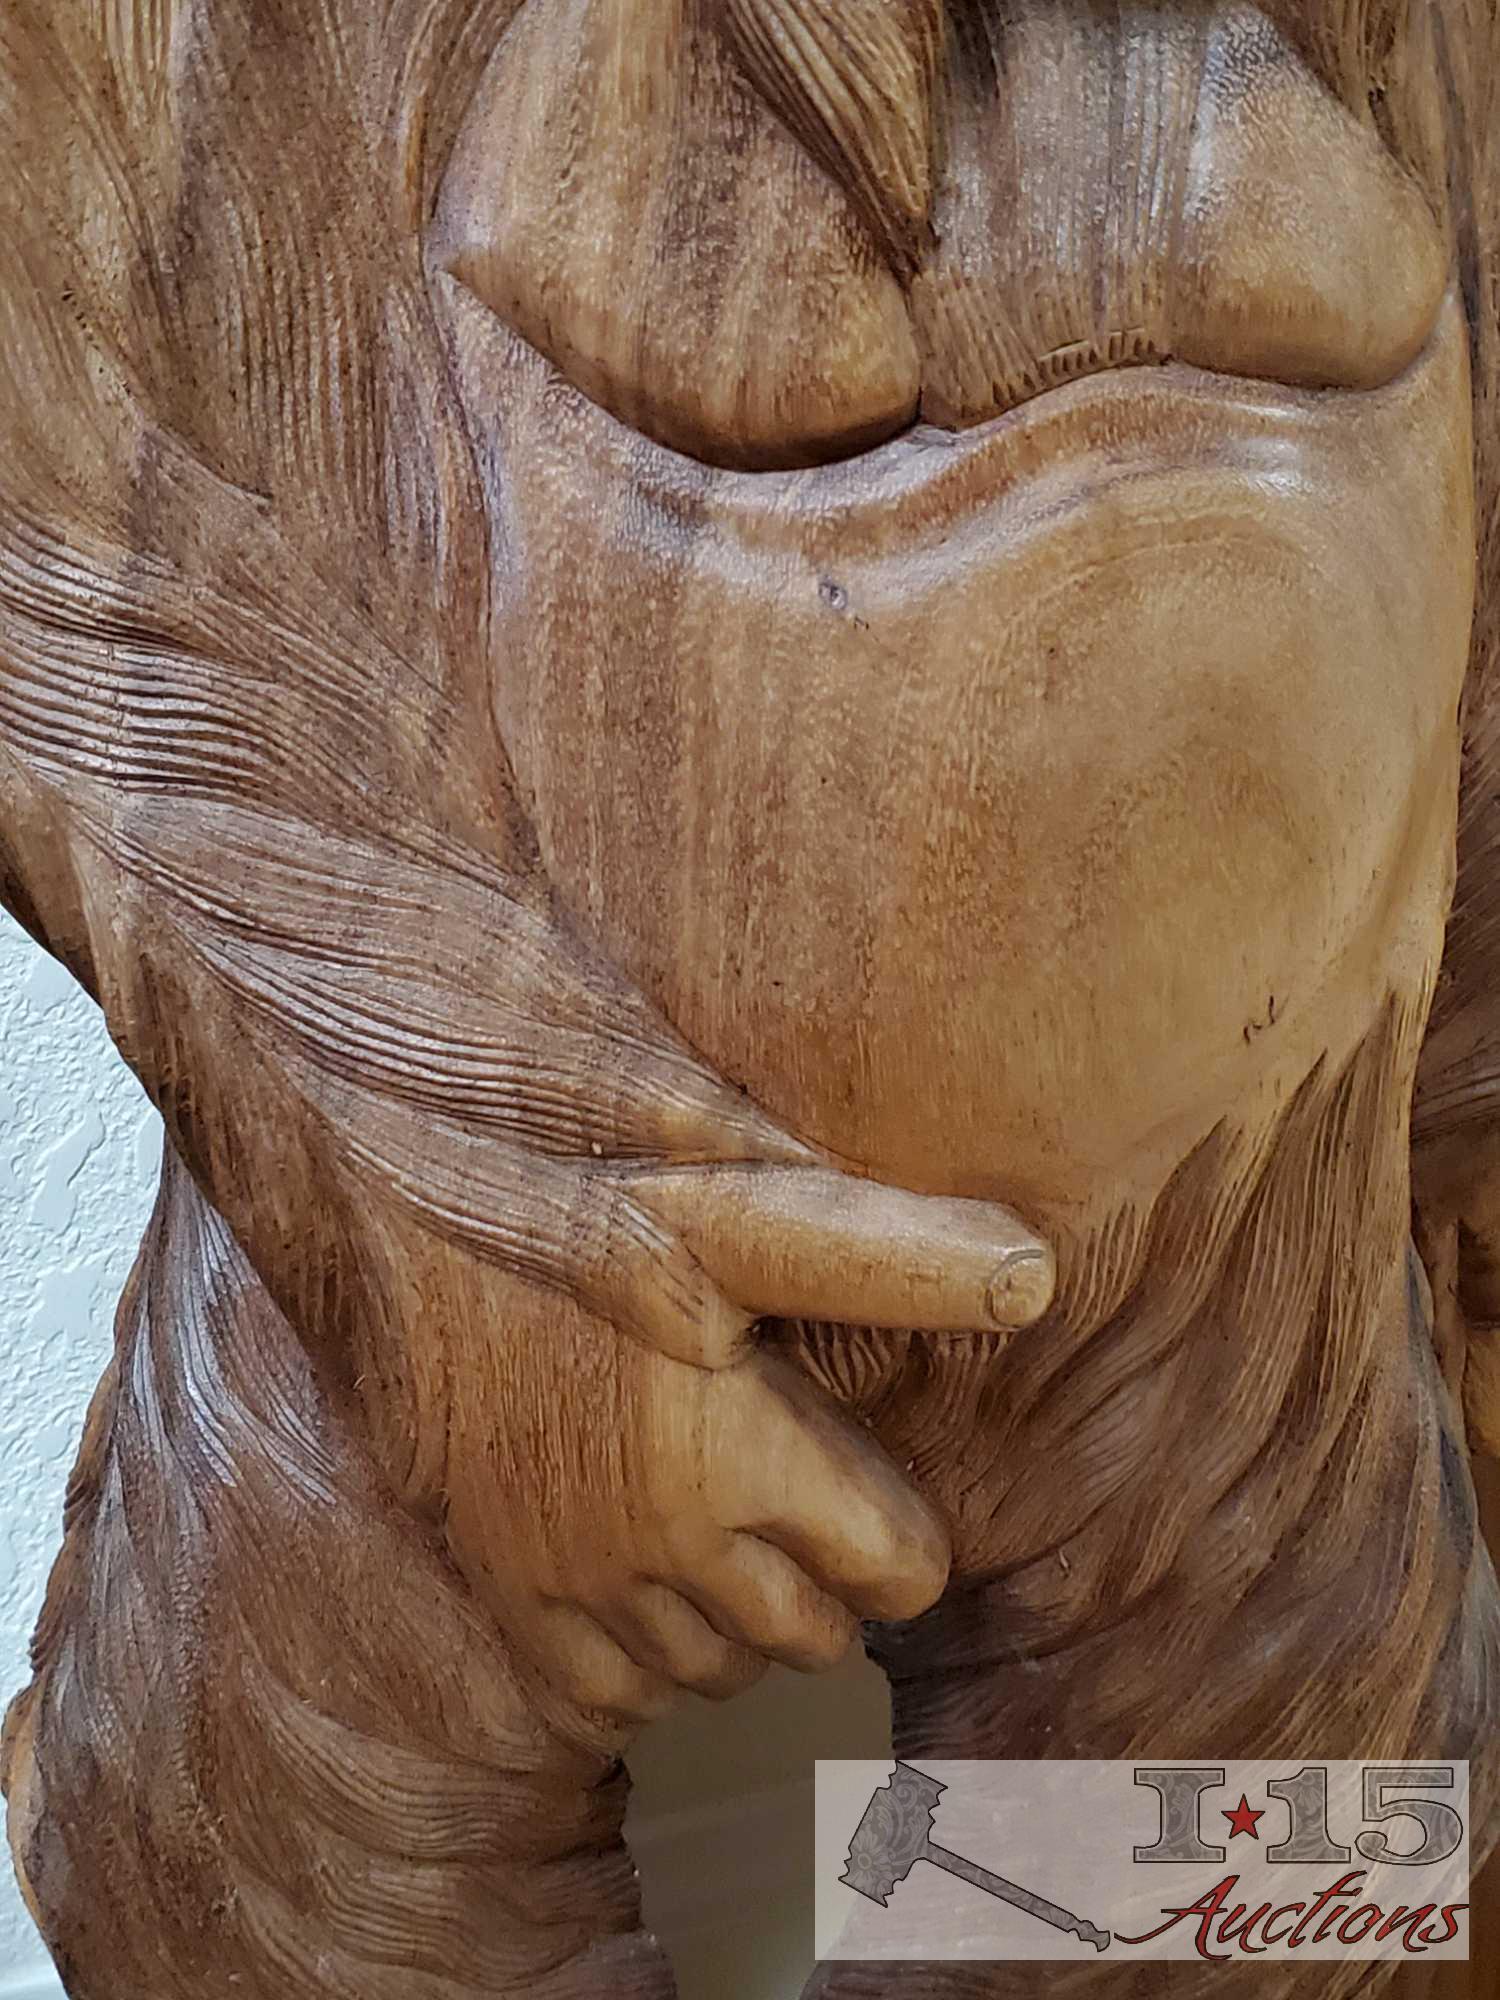 Three Hand Carved Wooden Ape Statues